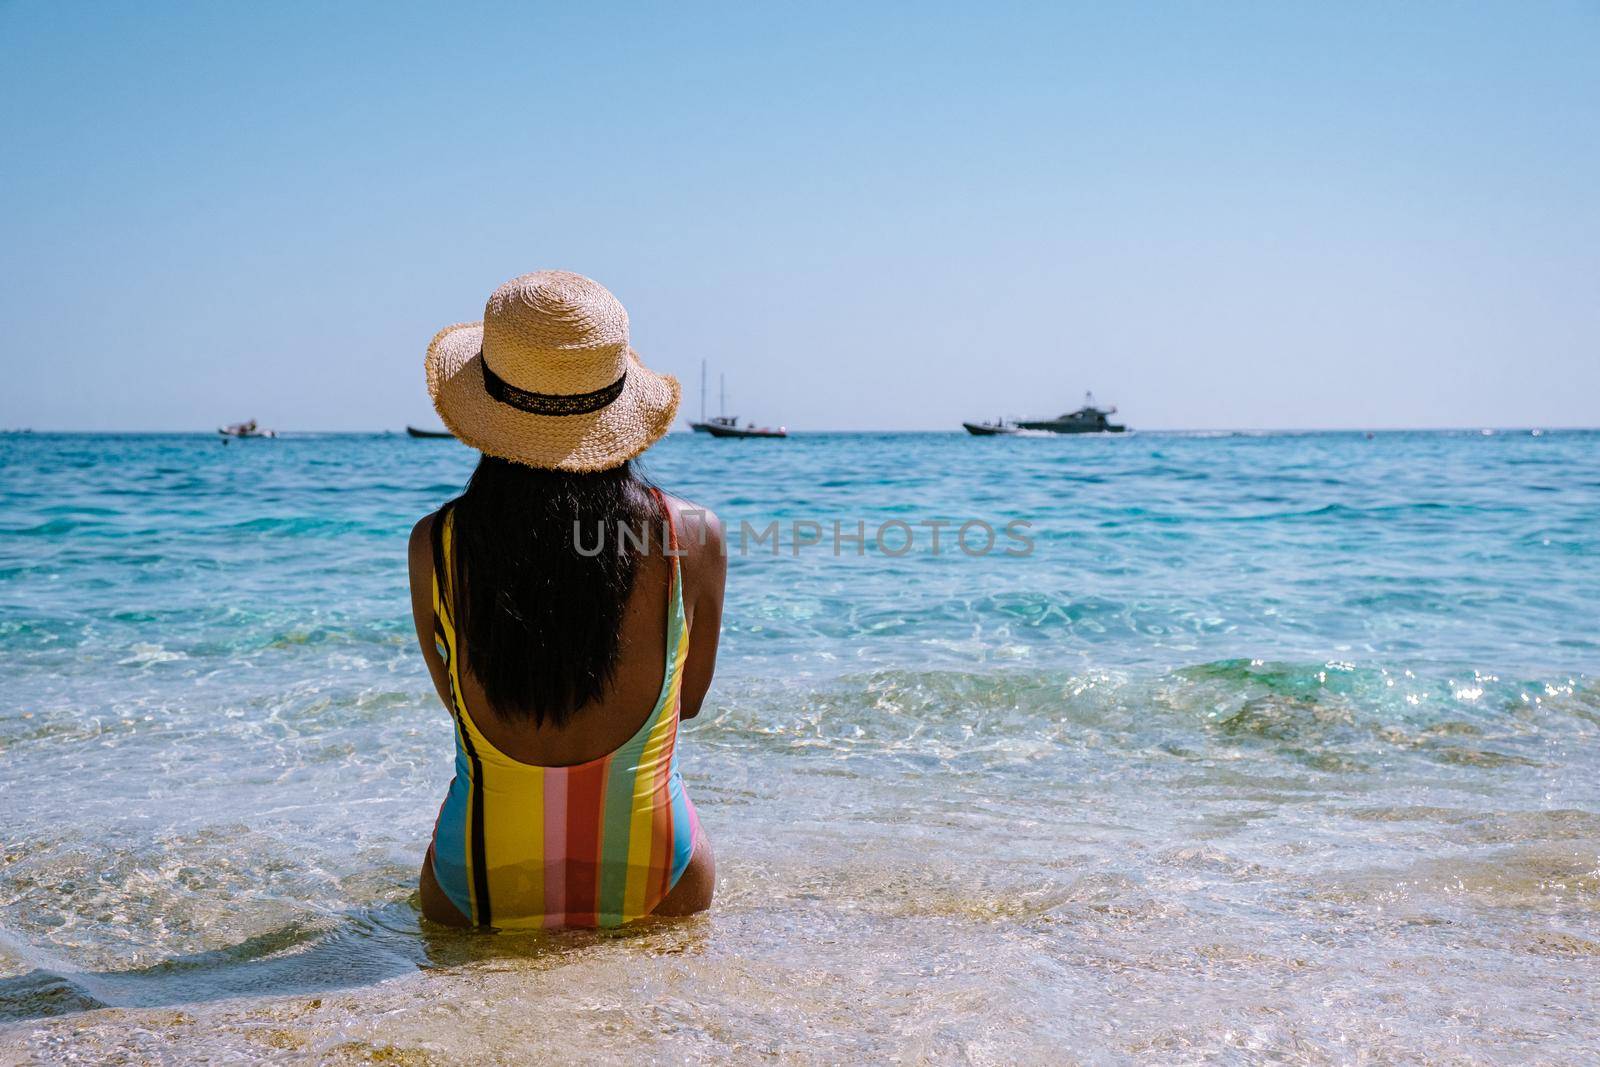 Golfo di Orosei Sardina, Asian women on the beach Sardinia Italy, a young girl on vacation Sardinia Italy, woman playing in the ocean with crystal clear blue water,